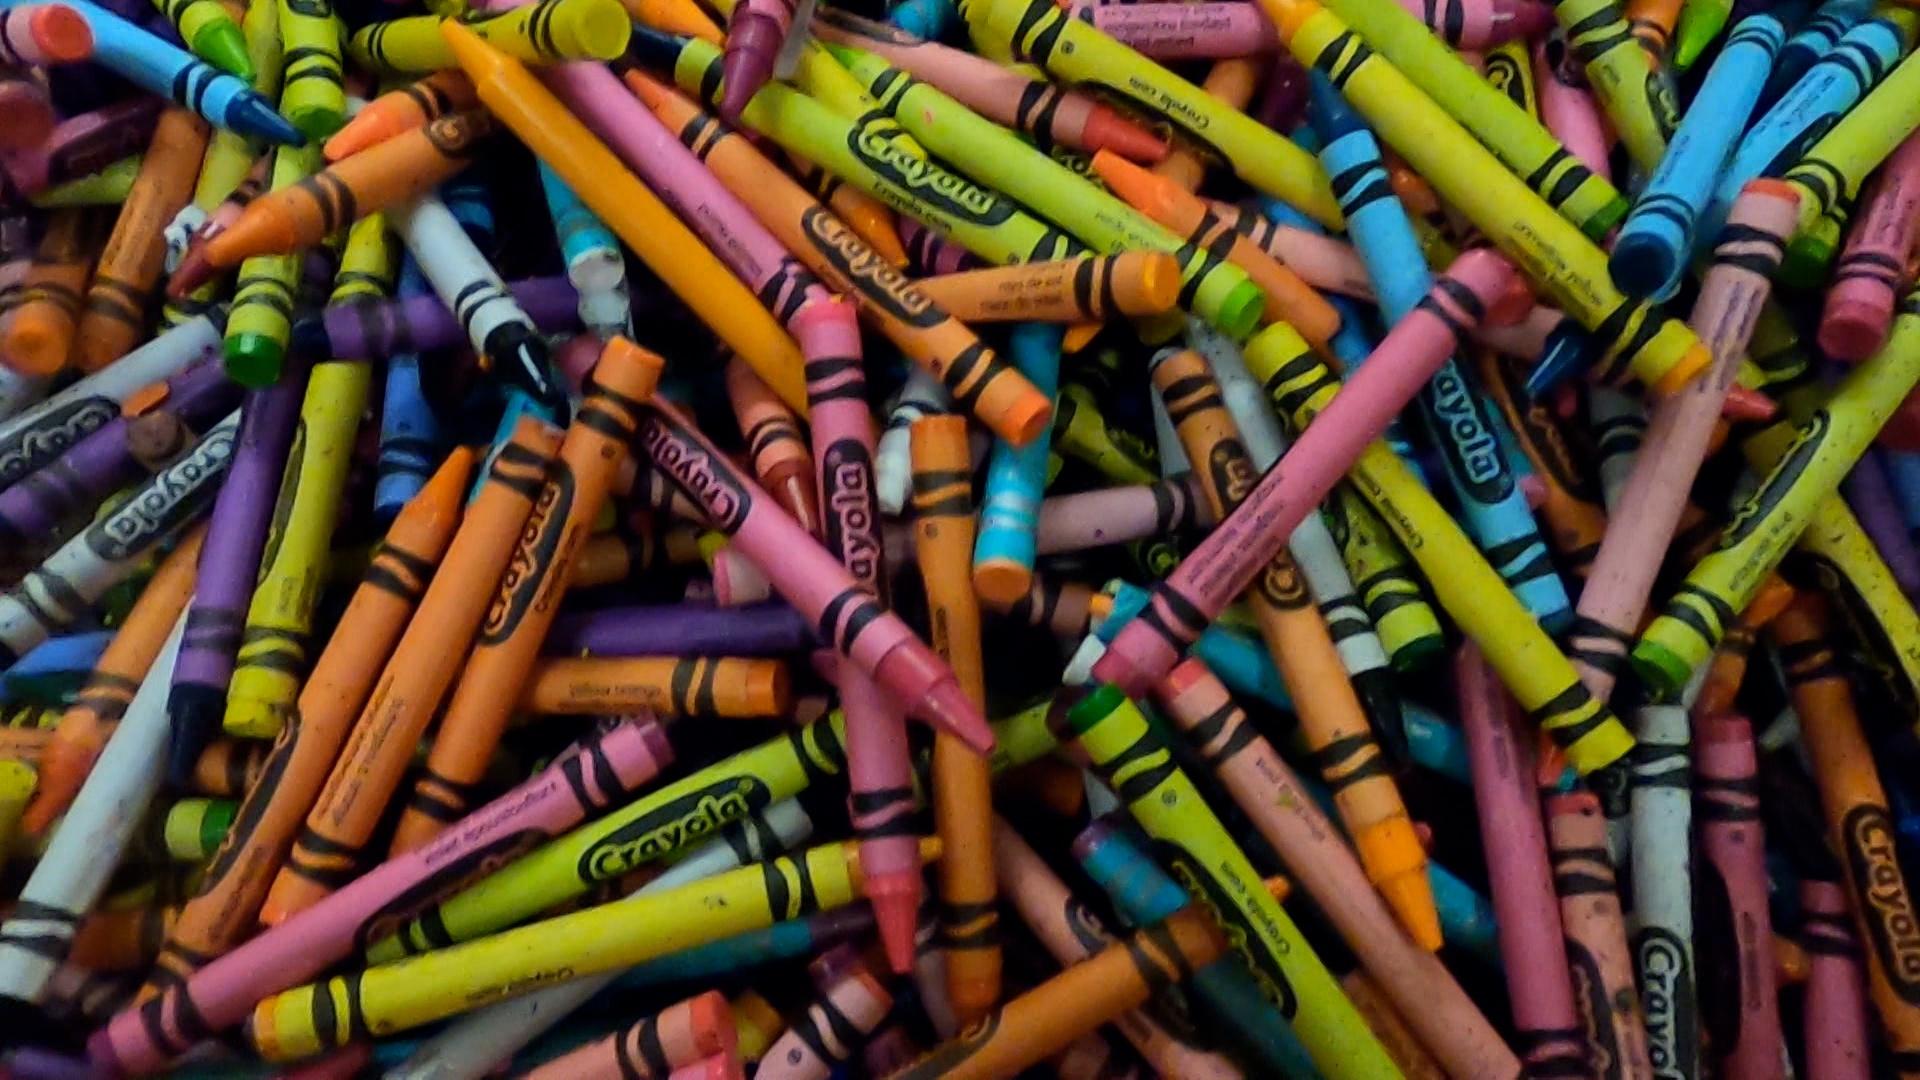 All of Us Skin Tone Crayons Reflect the Planet's Diversity with